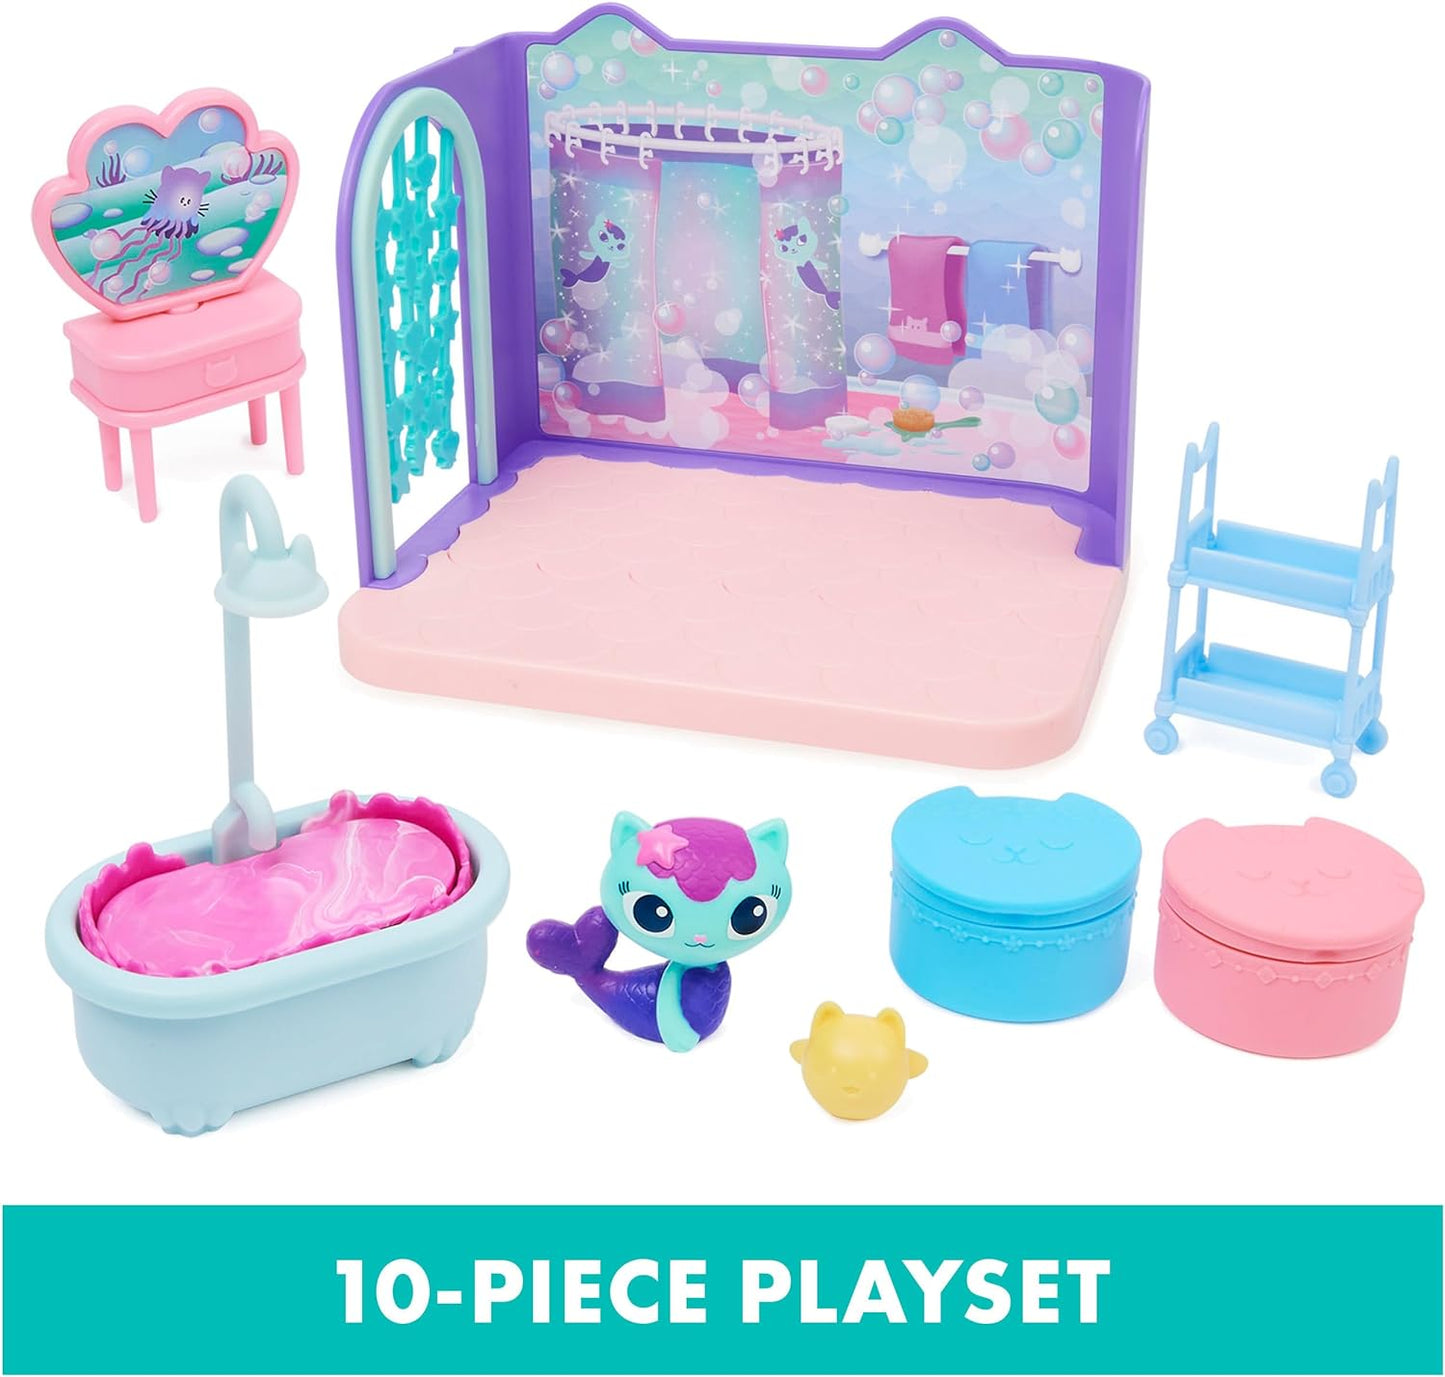 Gabby'S Dollhouse, Primp and Pamper Bathroom with Mercat Figure, 3 Accessories, 3 Furniture and 2 Deliveries, Kids Toys for Ages 3 and Up